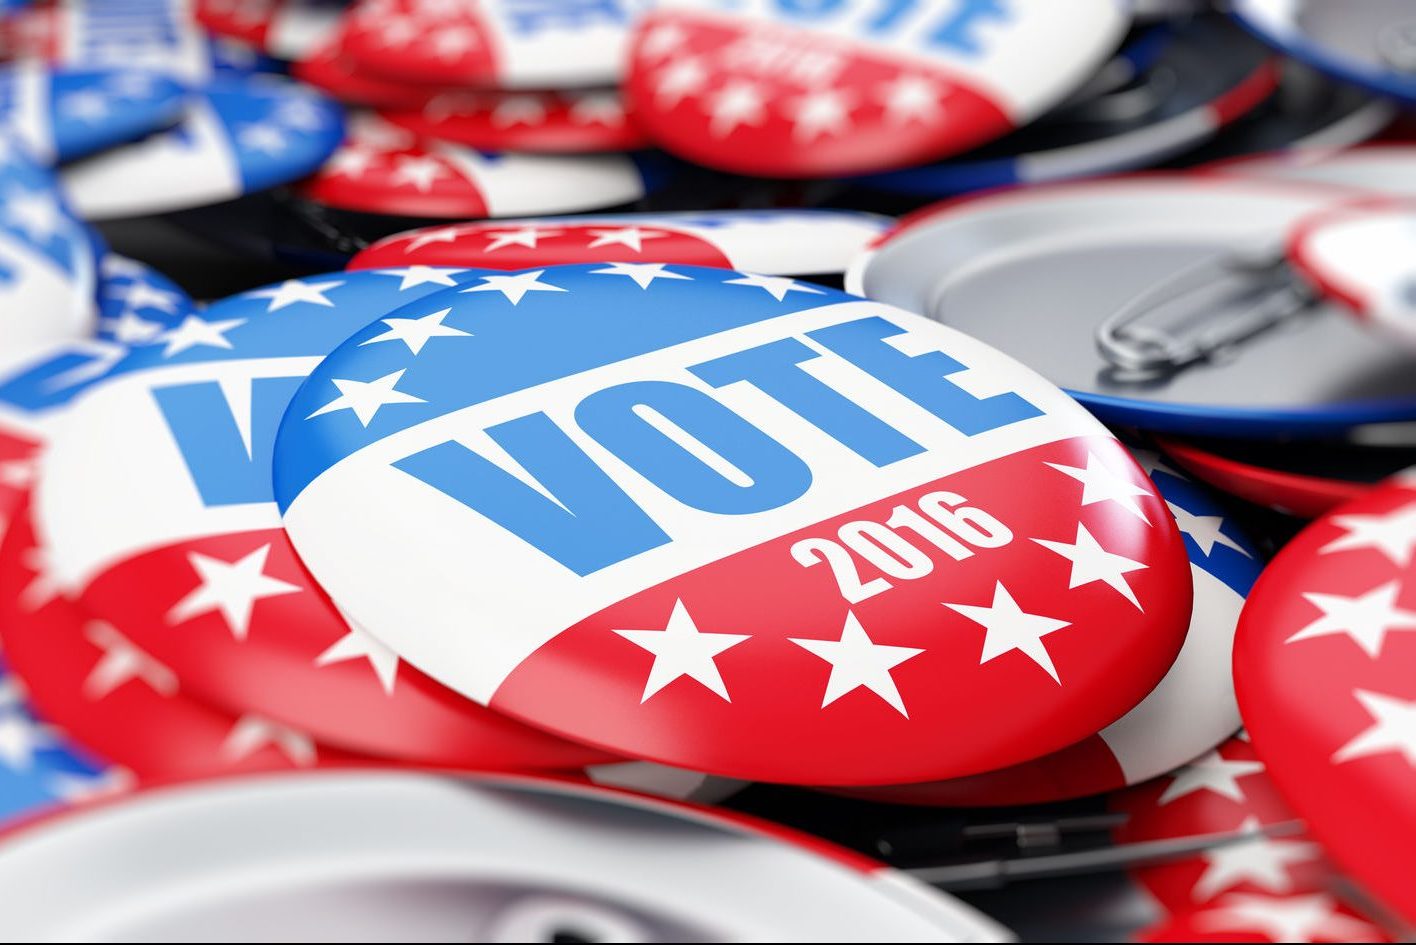 53801539 - vote election badge button for 2016 background